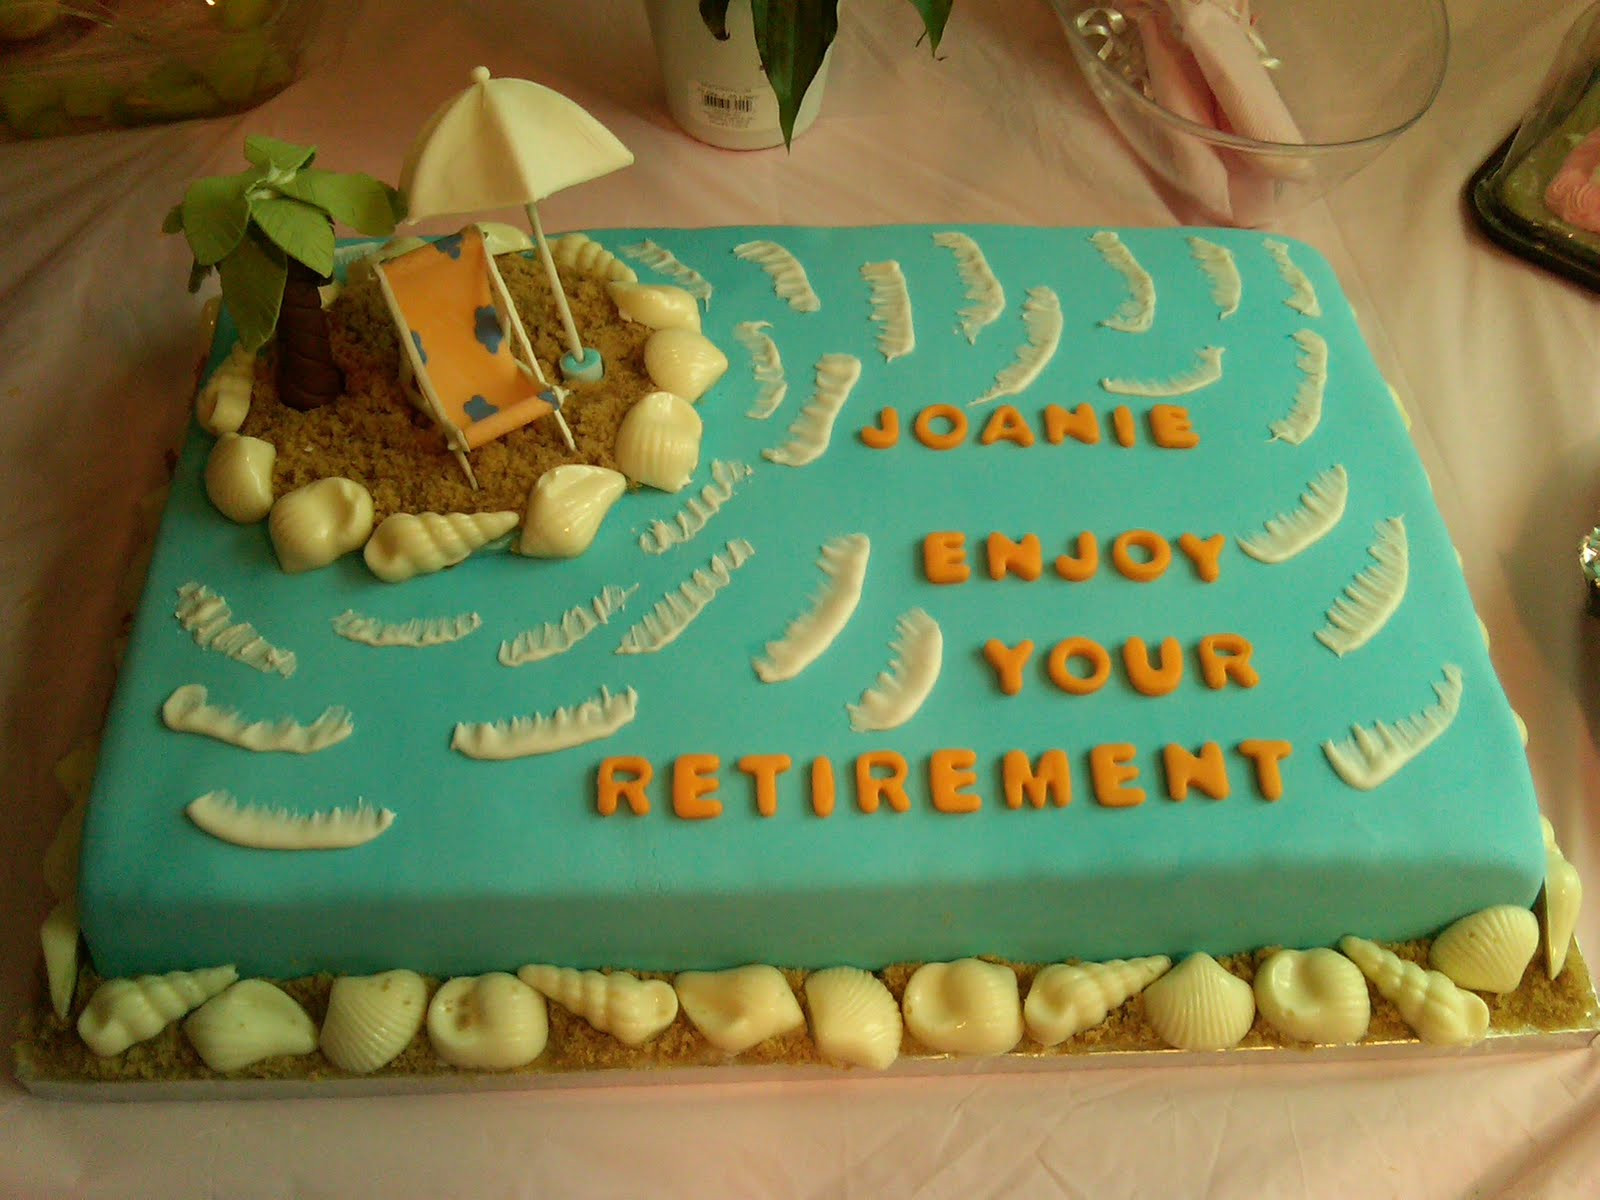 Cake Decorating Ideas For Retirement Party
 Retirement Cake Decorations Retirement cakes for your